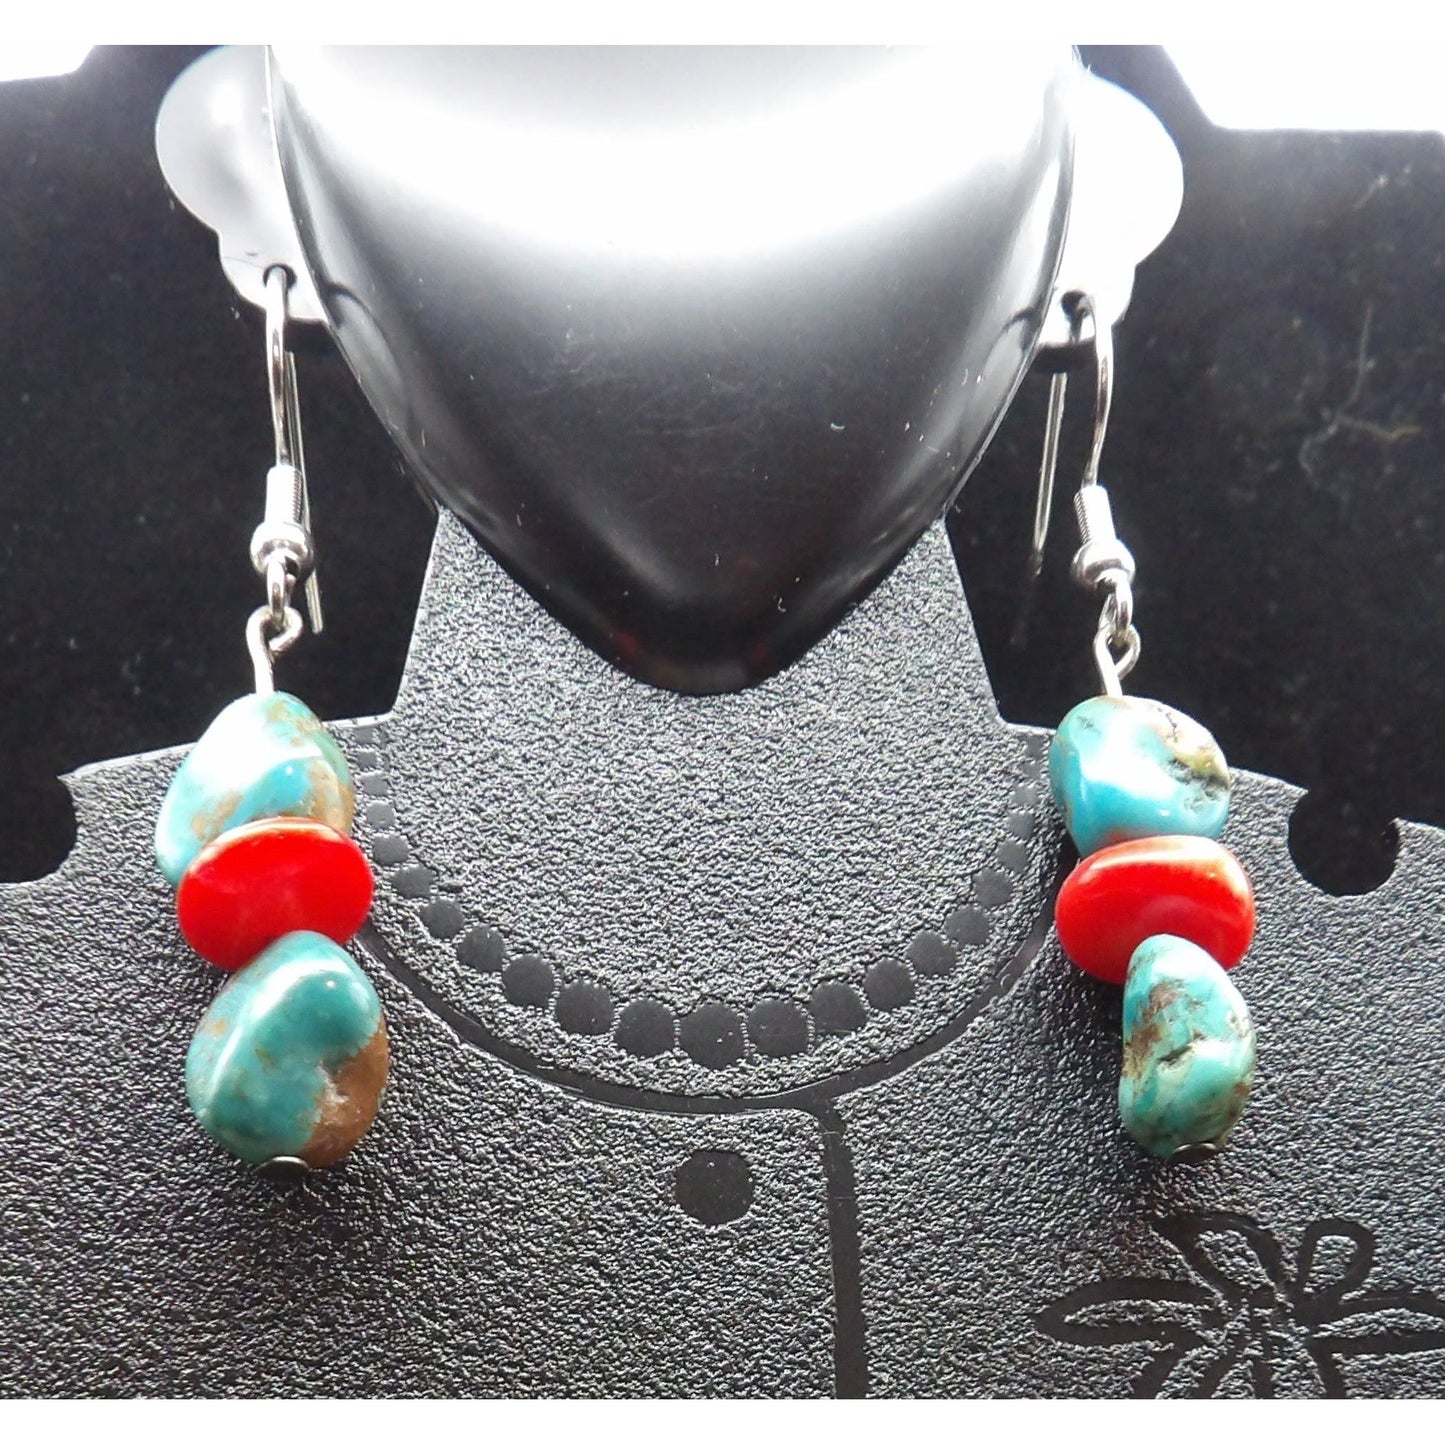 E5 - Green and Blue Turquoise Stones with Coral Chips Earrings